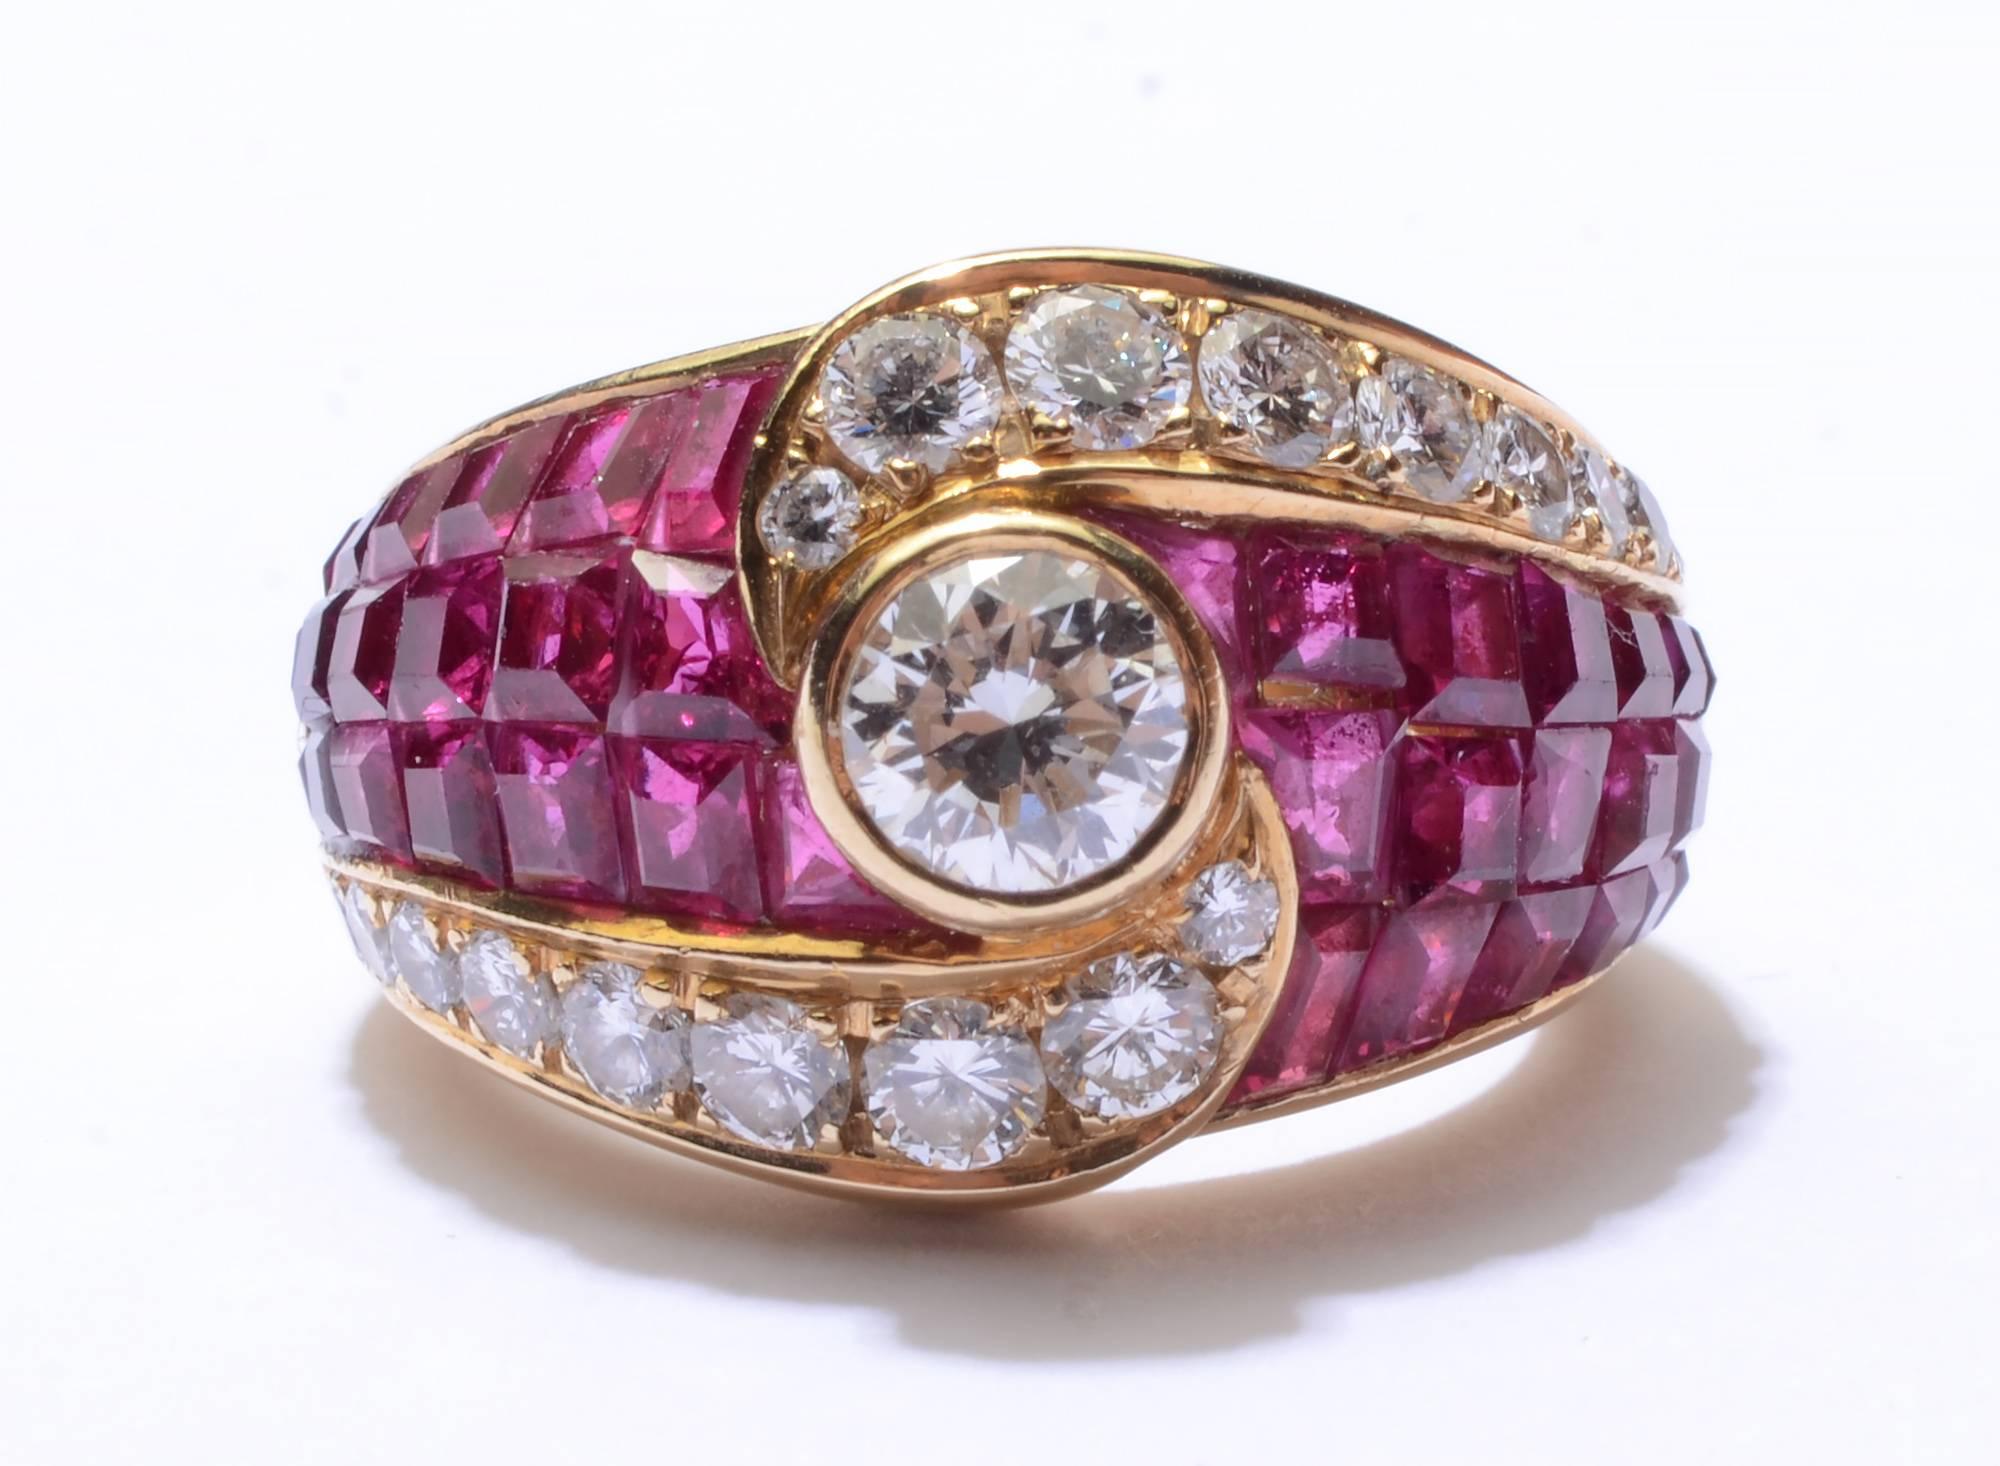 Stunning and graceful diamond ring with invisibly set Burma rubies. The central diamond is .5 carats; VS quality
Size 6 - can be modified